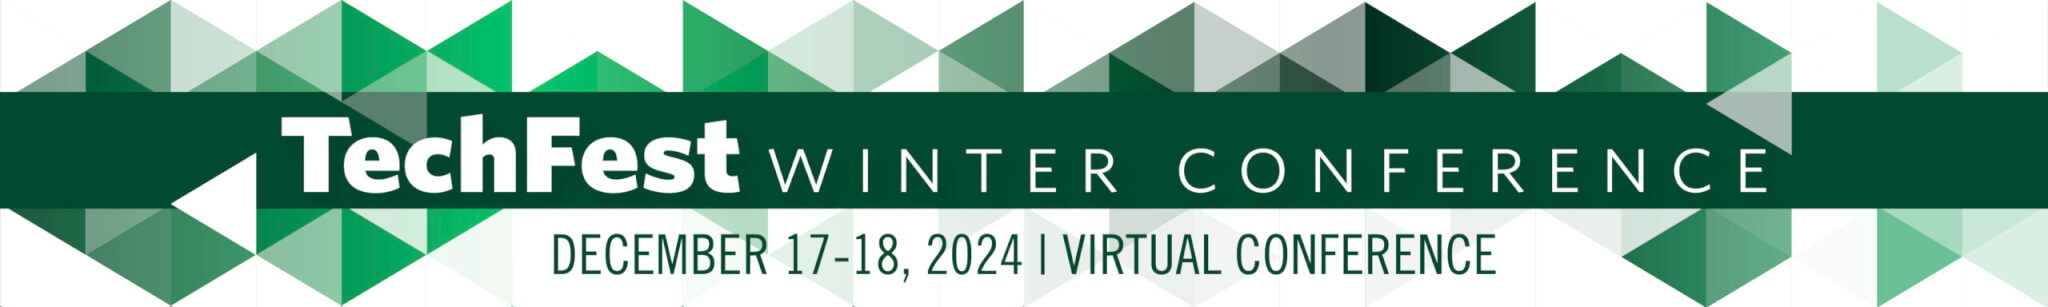 TechFest Winter Conference Header 2024